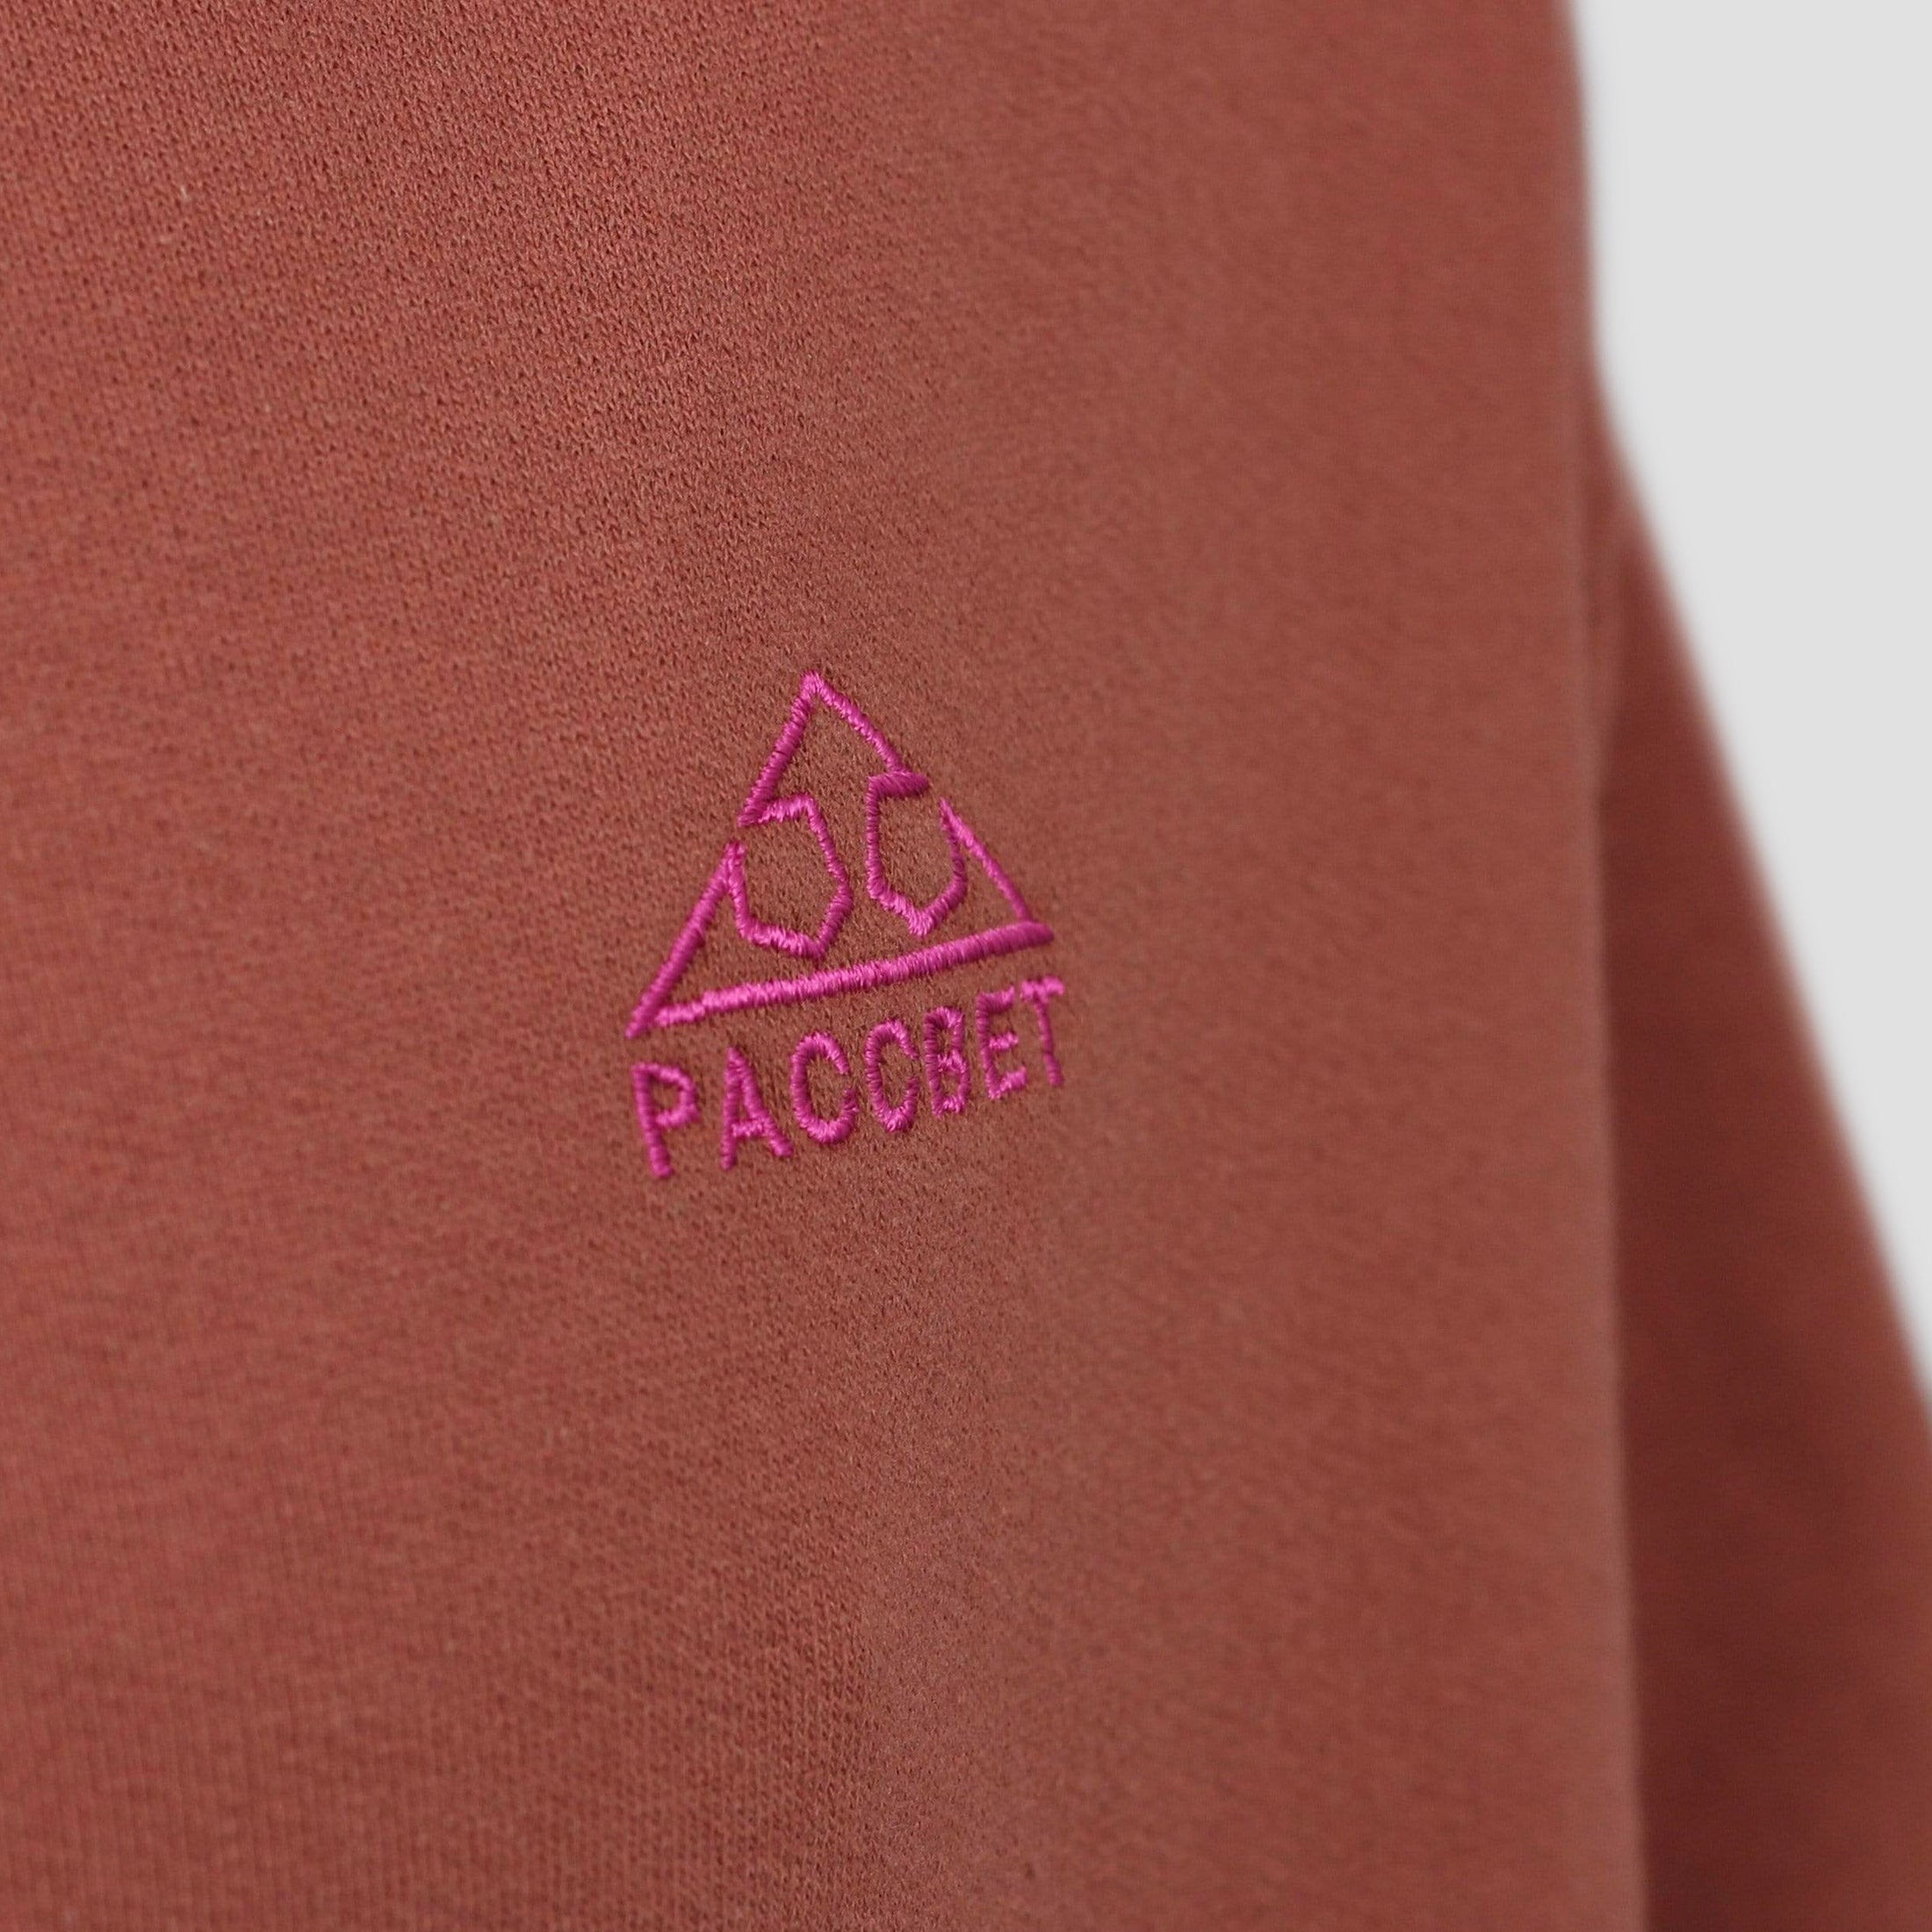 Paccbet Embroidered Crew Brown